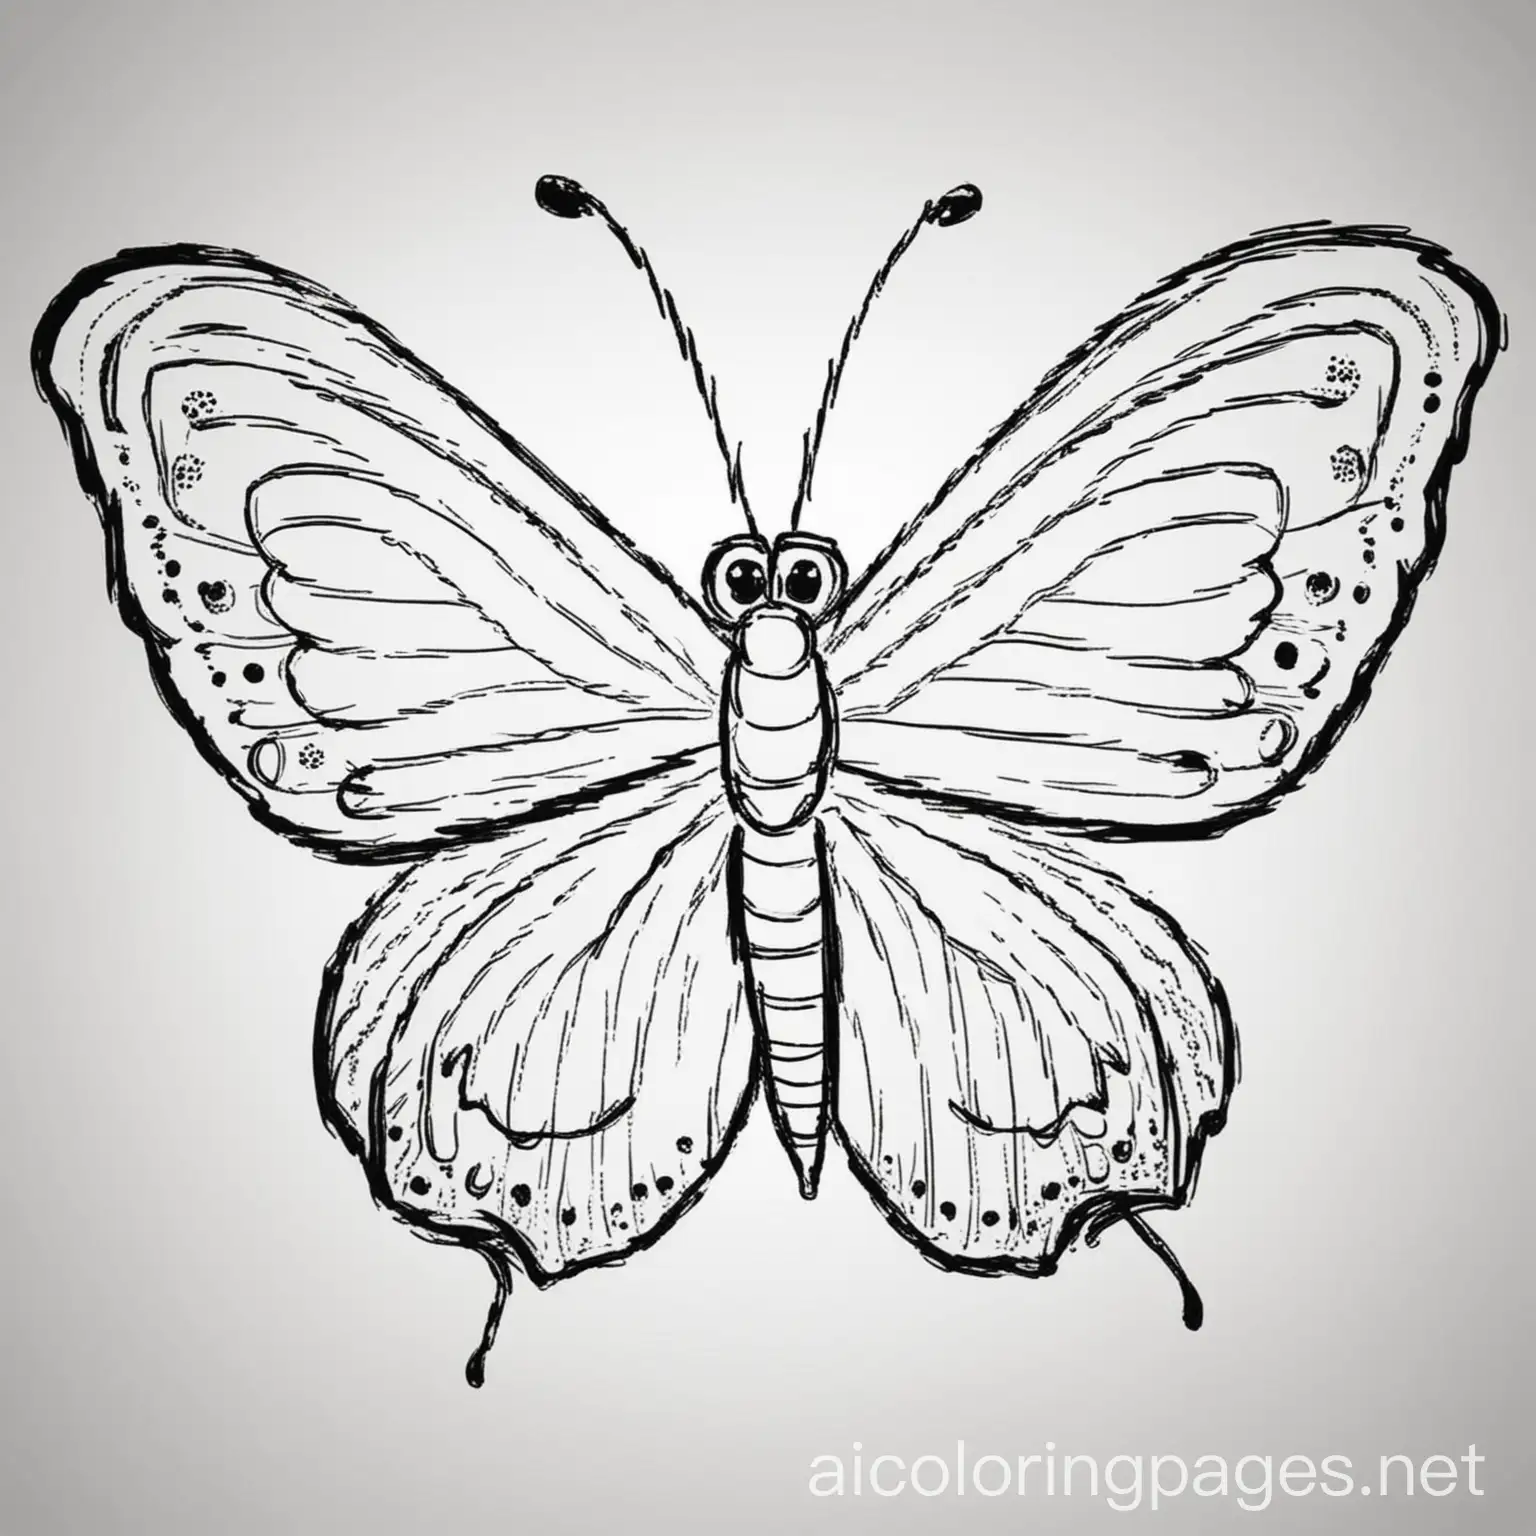 Simple-Butterfly-Coloring-Page-for-Kids-Black-and-White-Line-Art